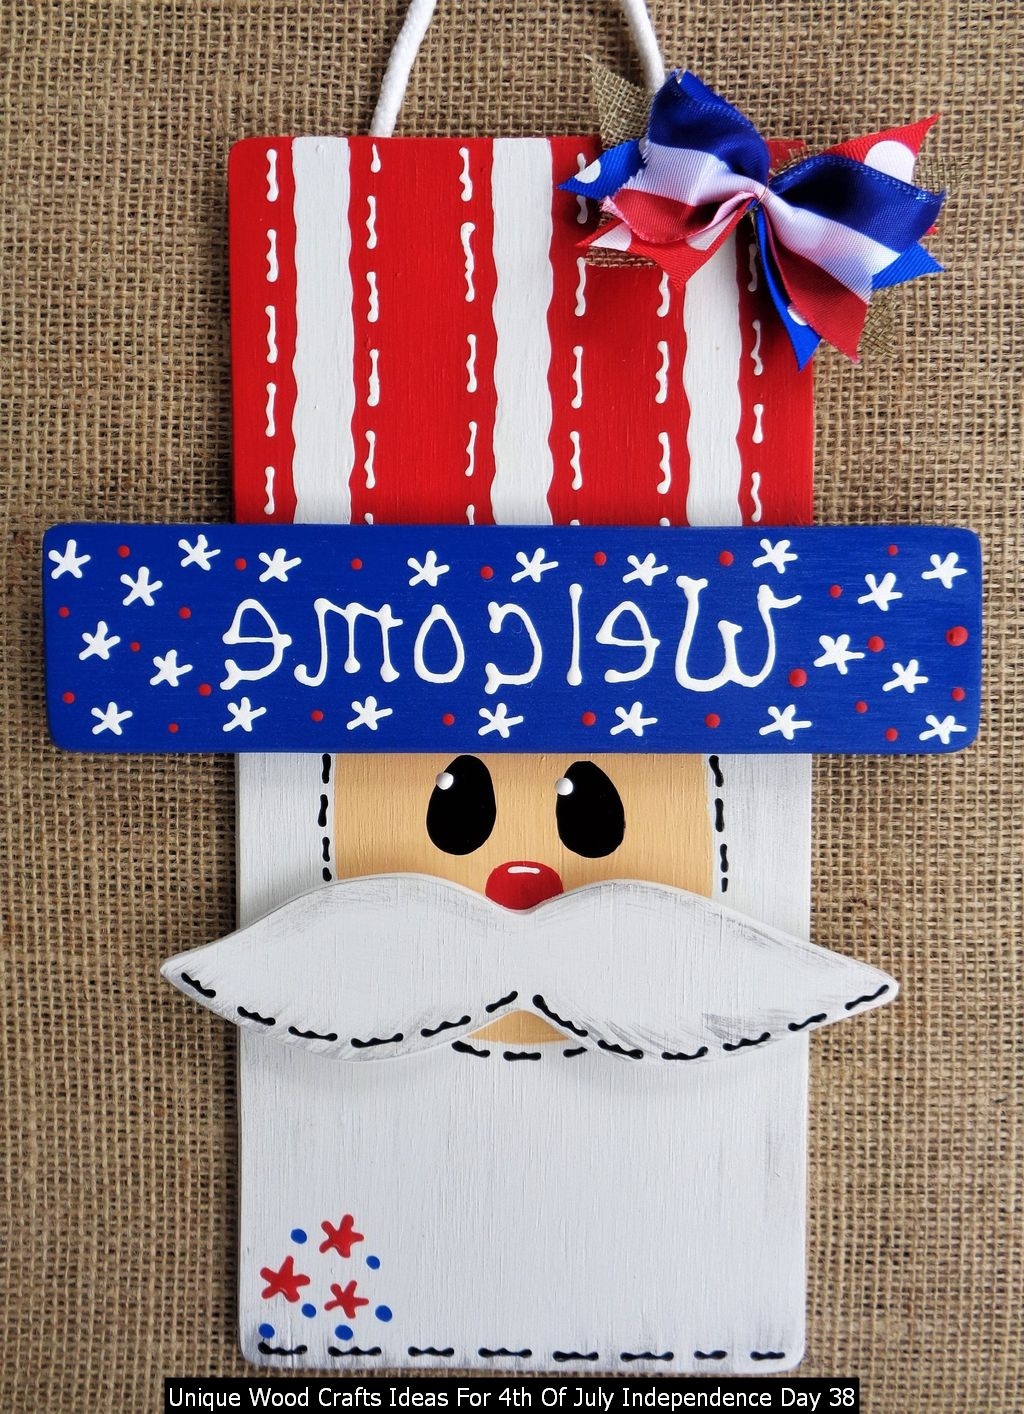 Unique Wood Crafts Ideas For 4th Of July Independence Day 38